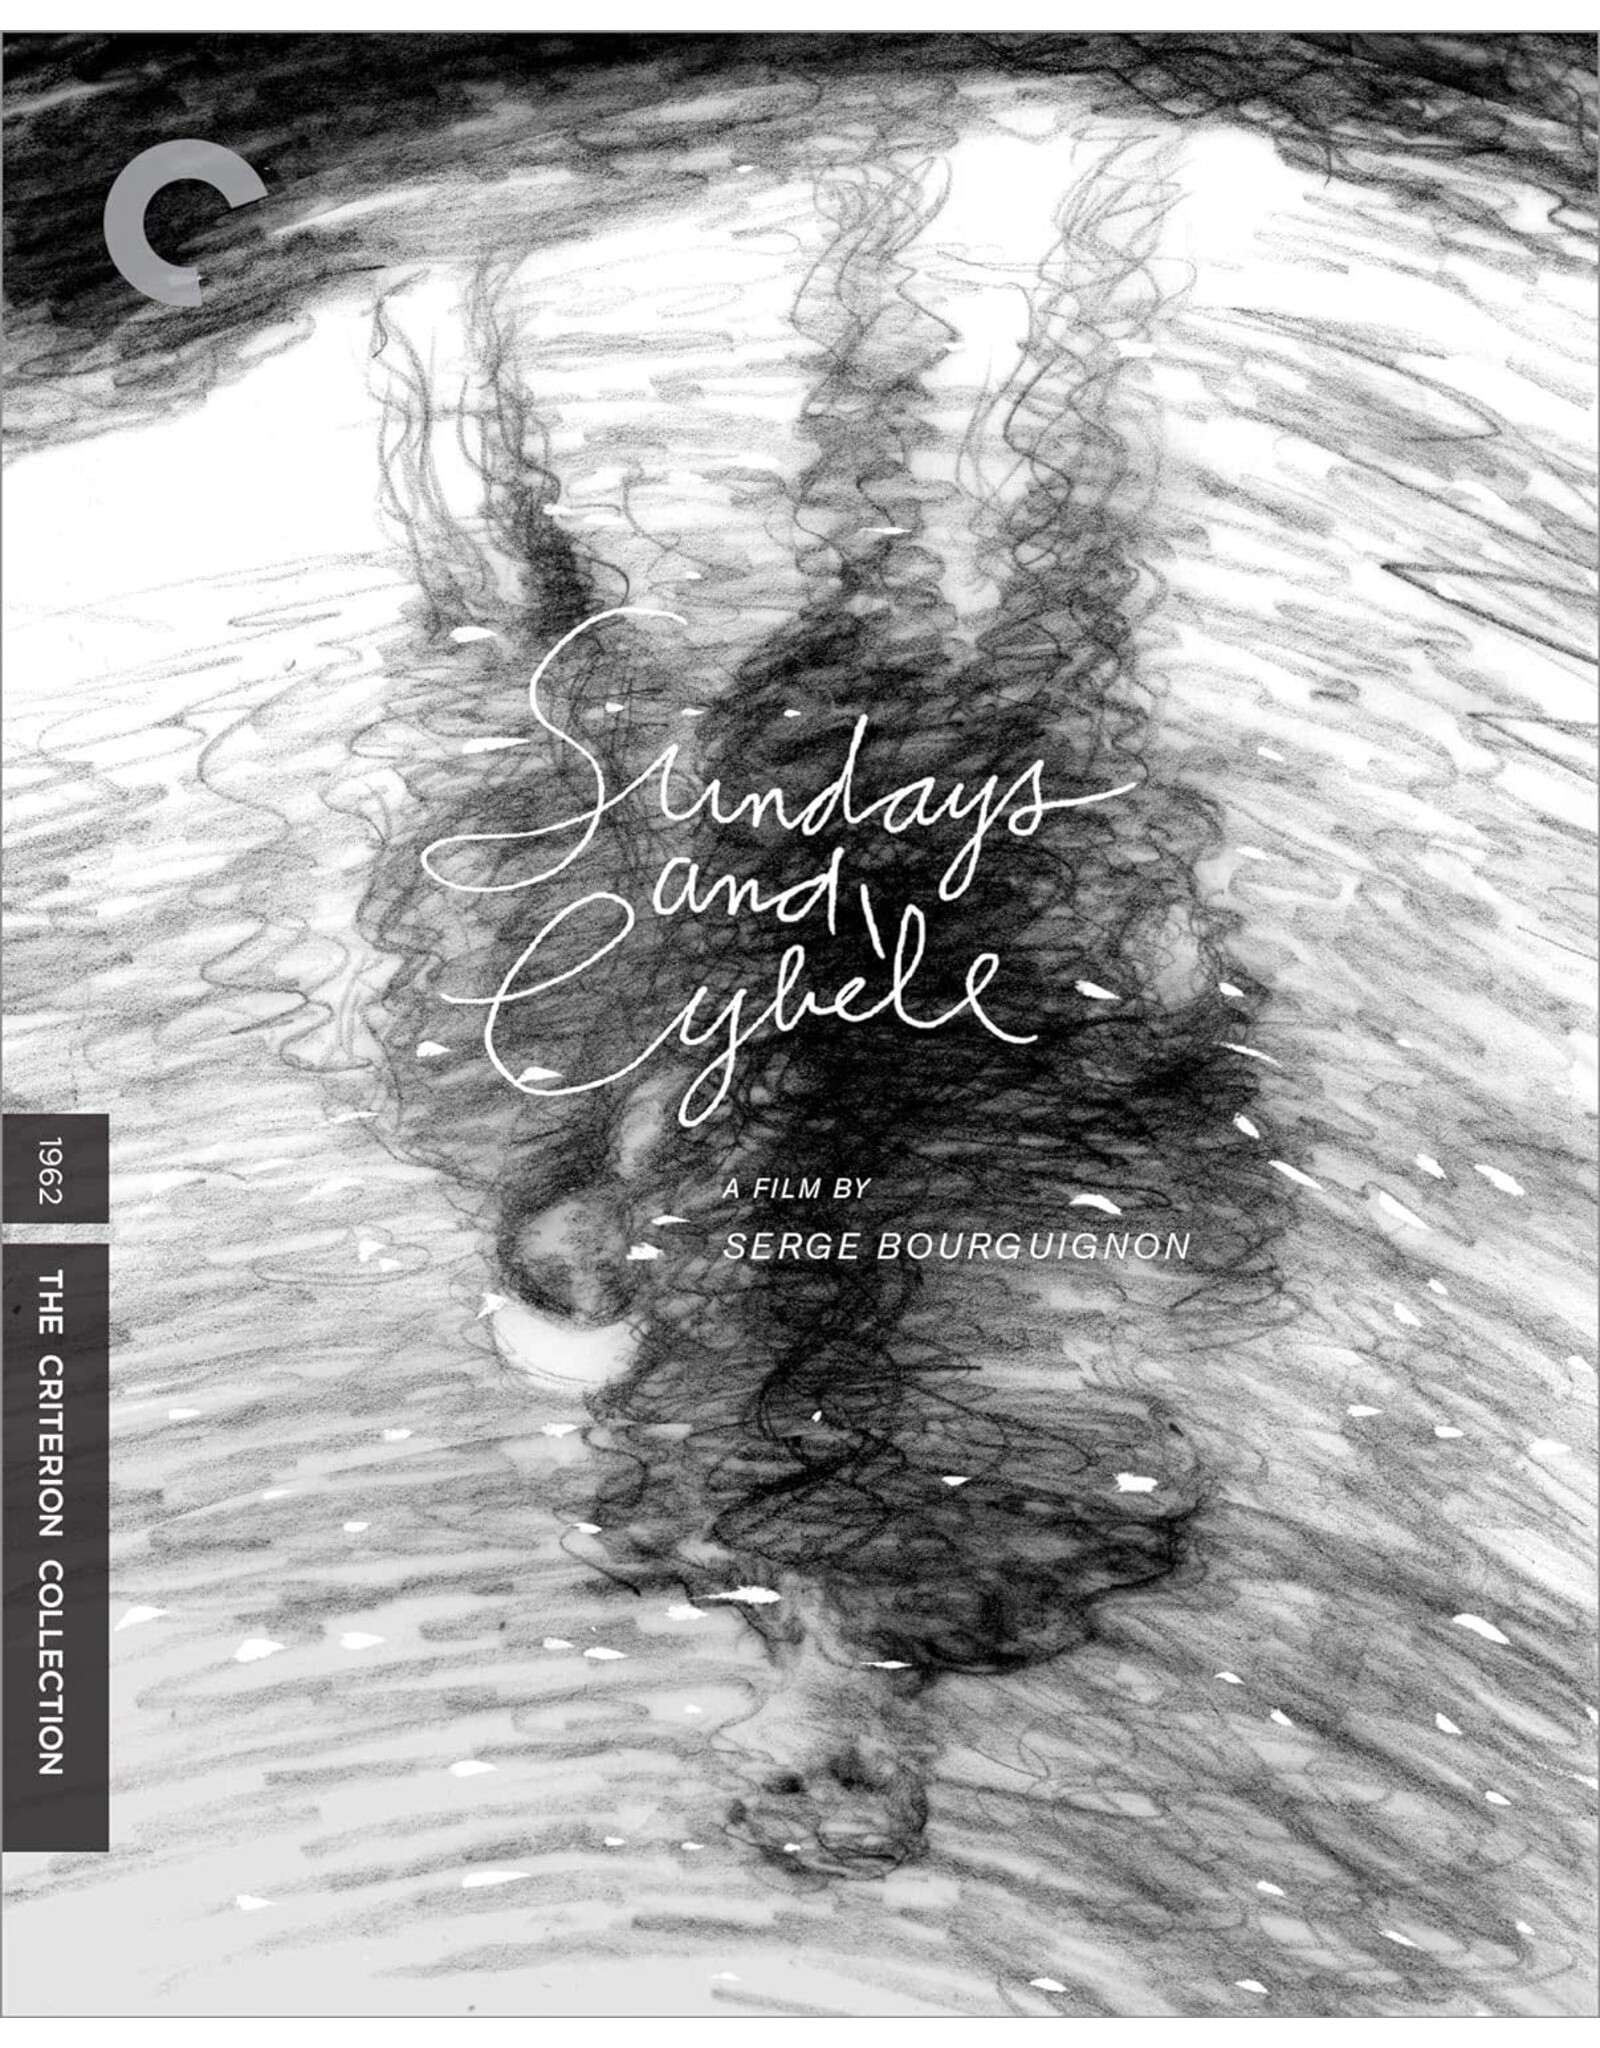 Criterion Collection Sundays and Cybele - Criterion Collection (Used)